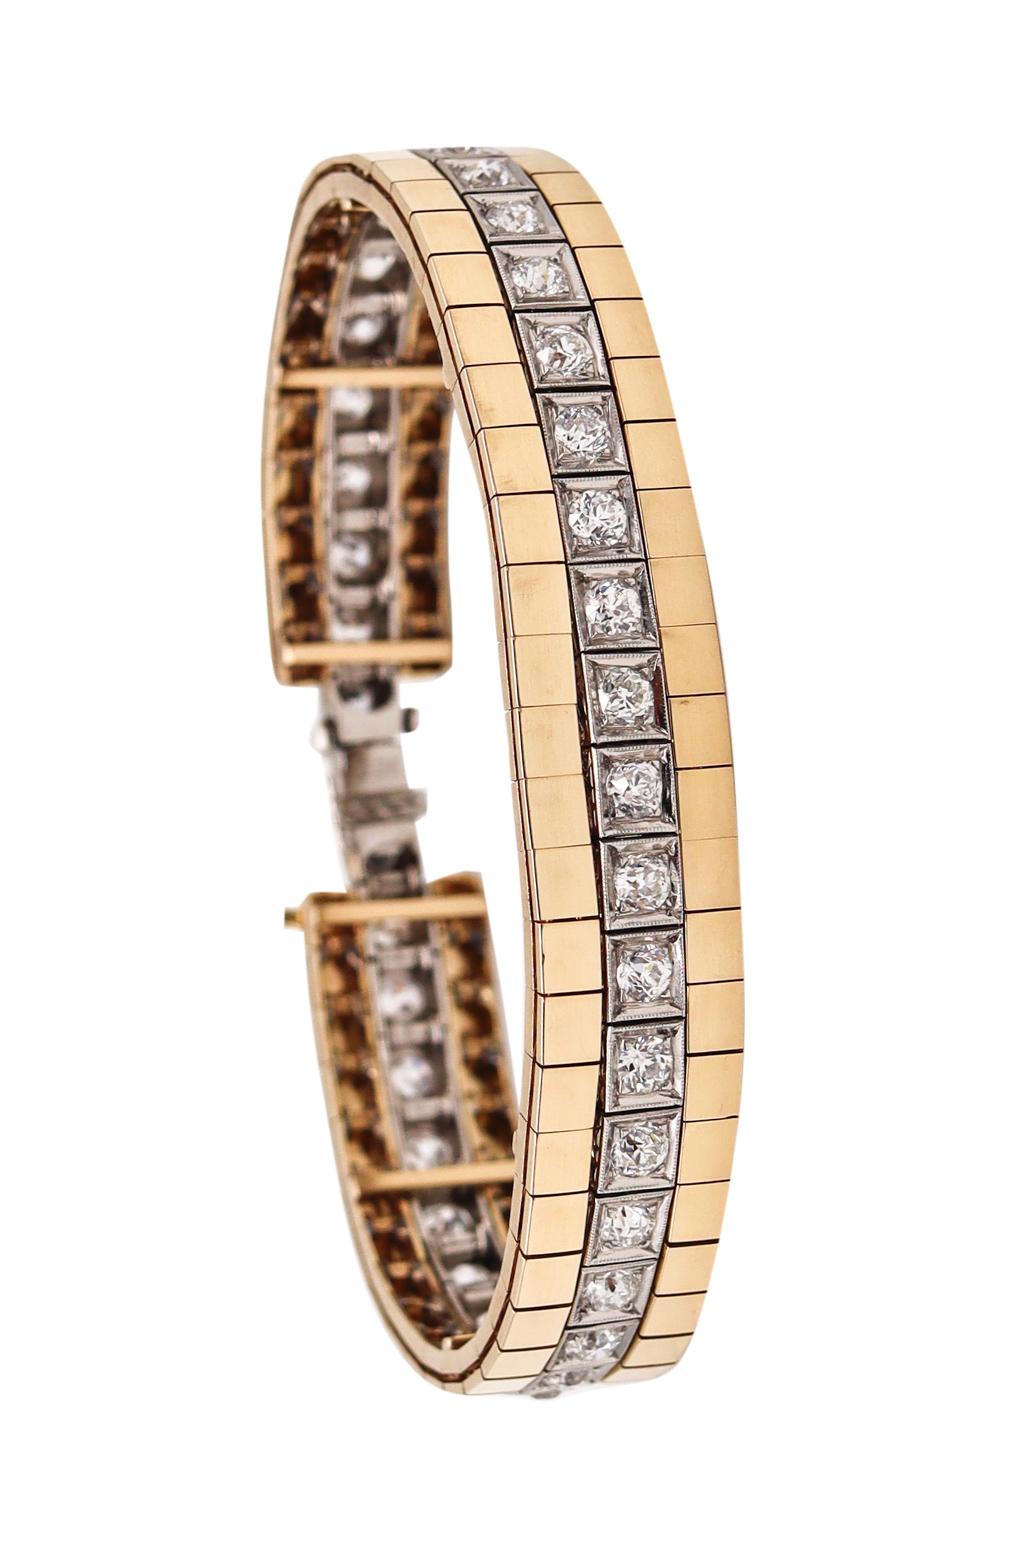 A convertible riviera diamonds bracelet designed by Raymond Yard.

Beautiful piece created during the American art deco and the retro periods at the atelier of Raymond C. Yard, back in the 1940's. This riviera bracelet has been crafted as a